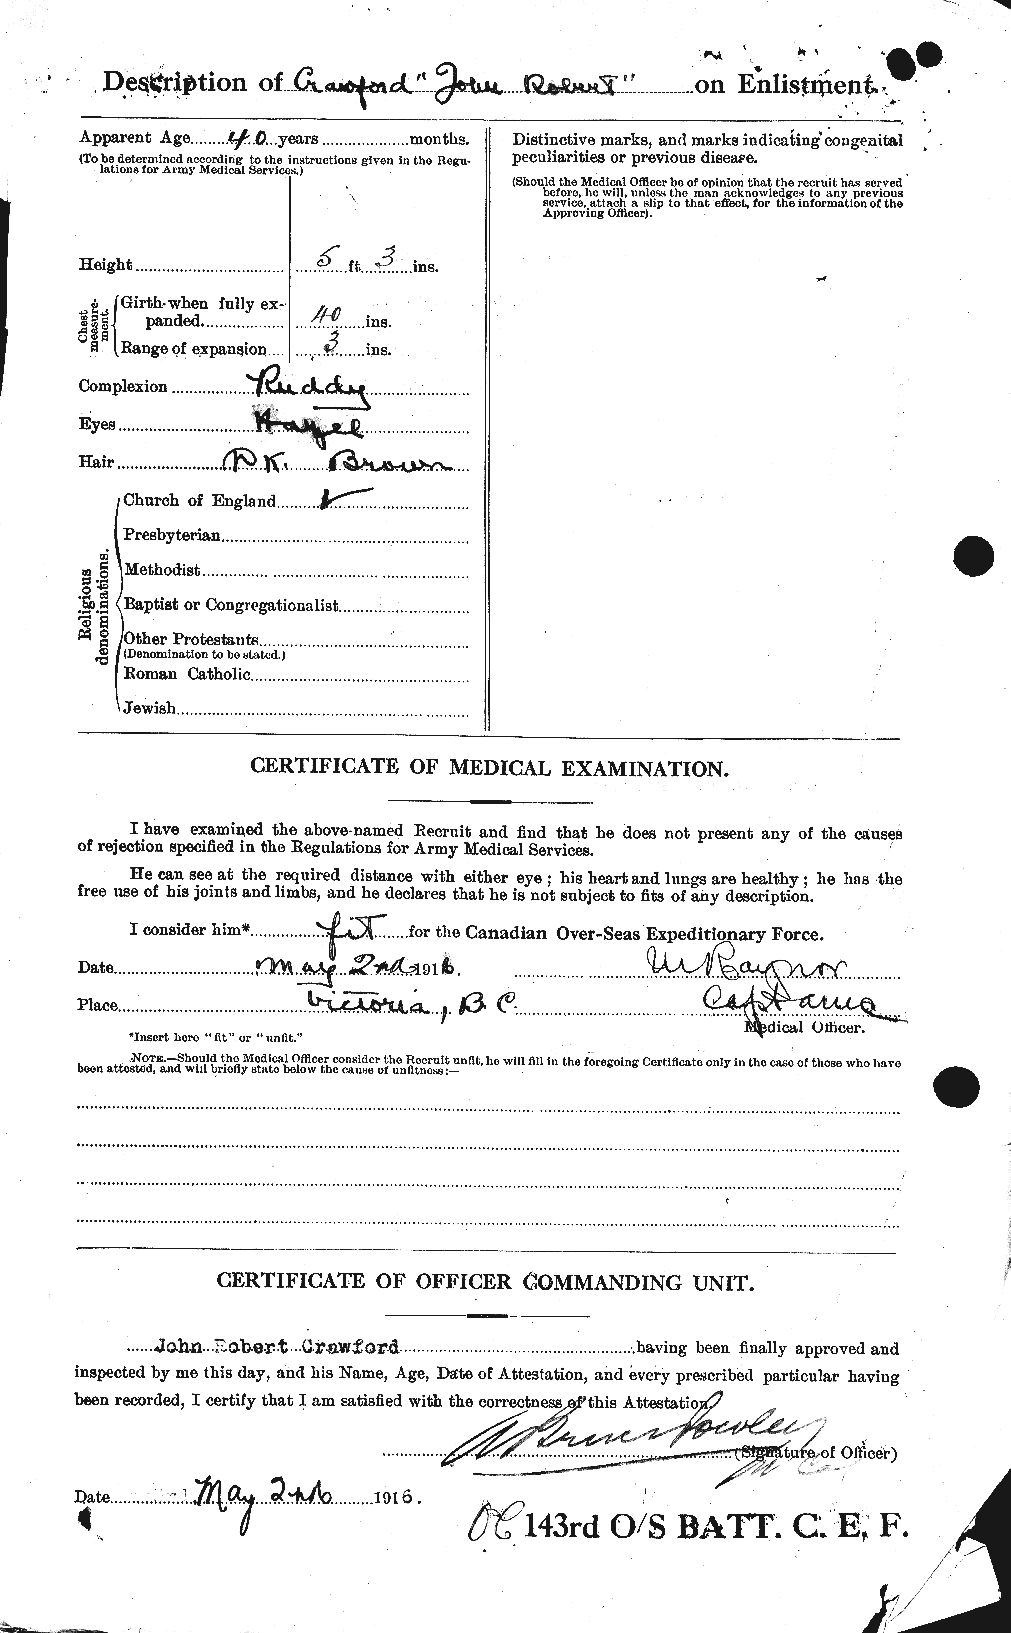 Personnel Records of the First World War - CEF 061825b